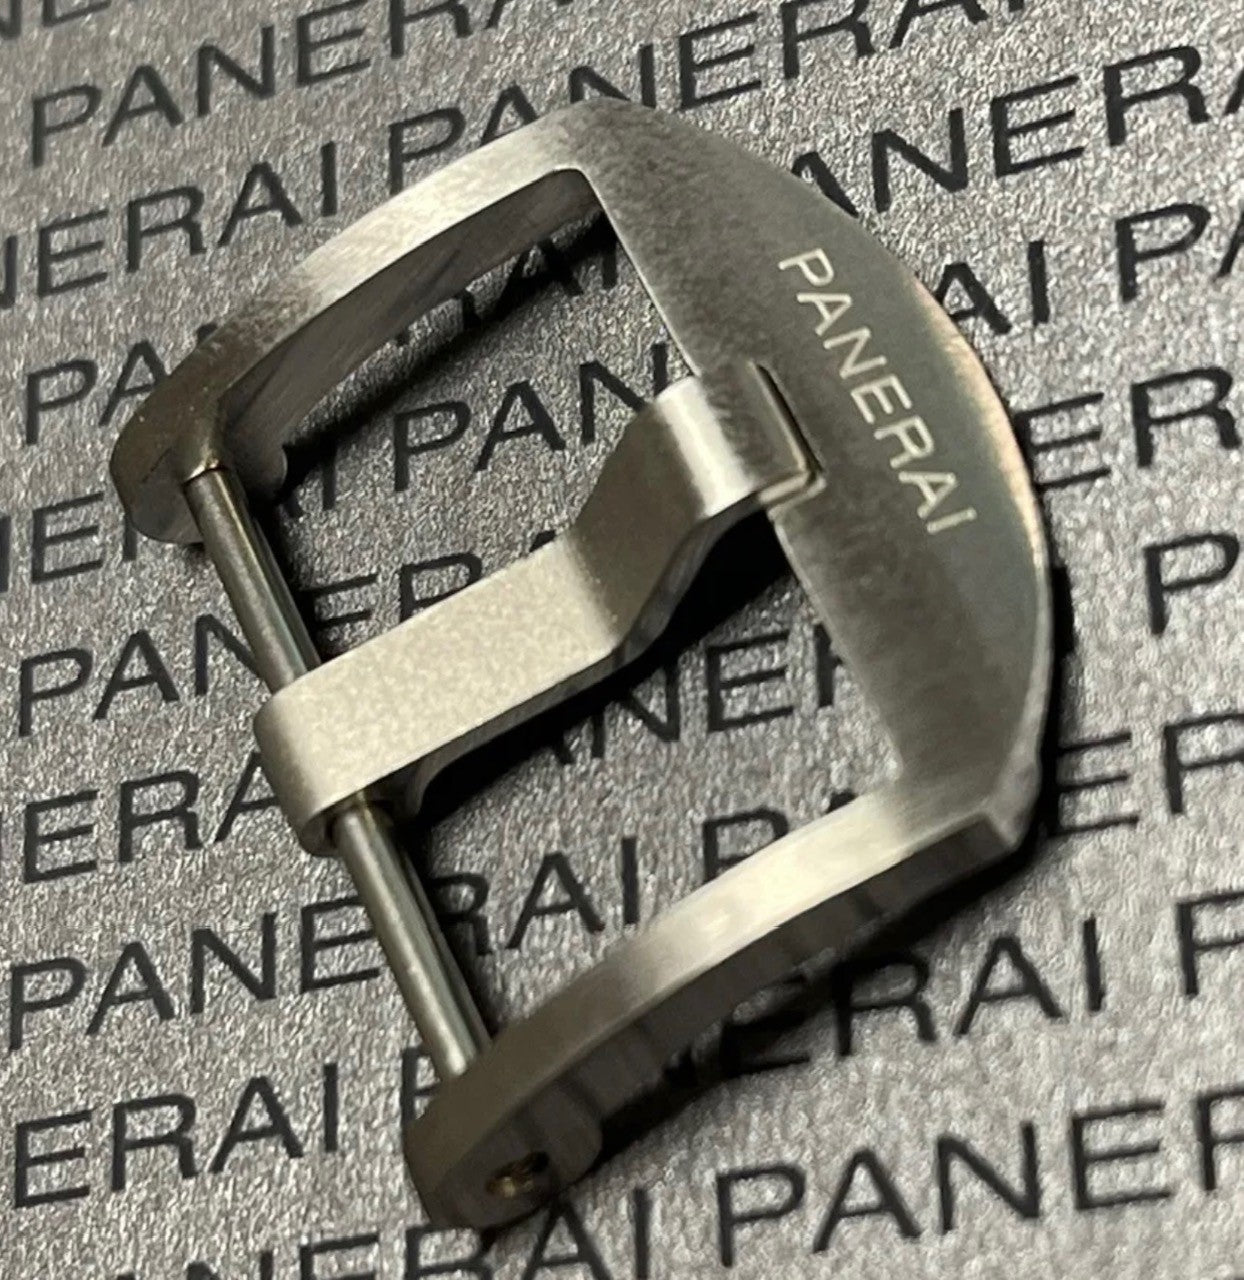 Panerai Brushed Stainless Steel Tang Buckle